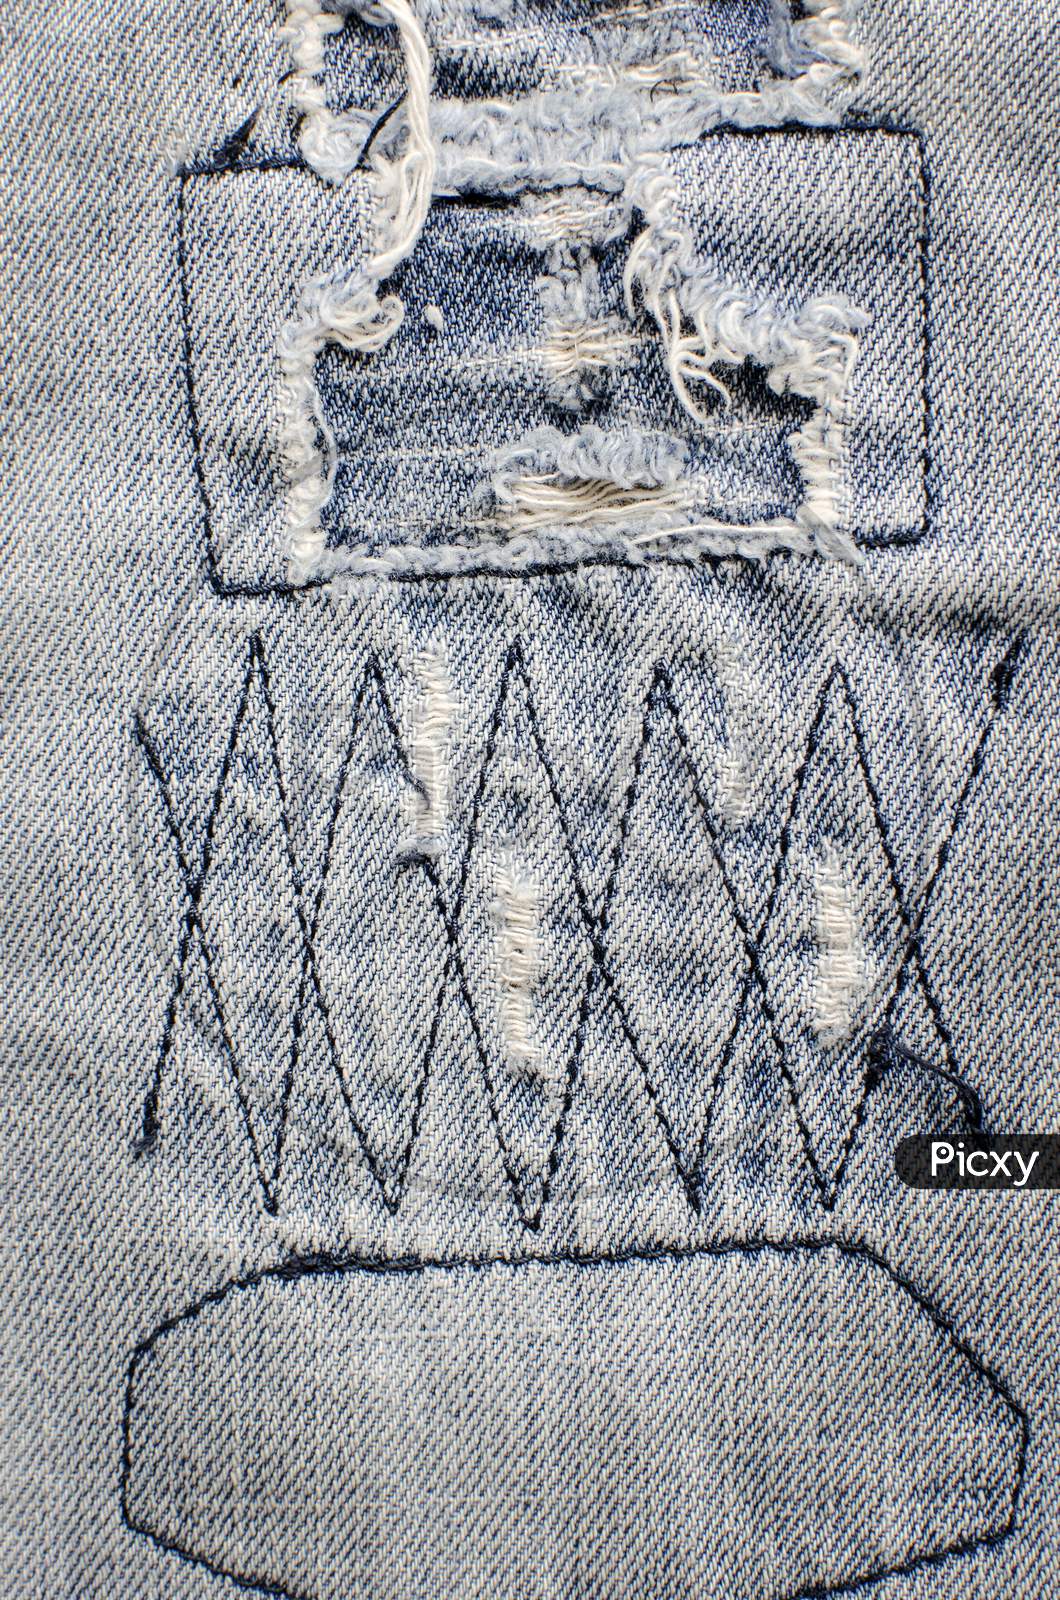 Denim Jeans Texture With Old Torn